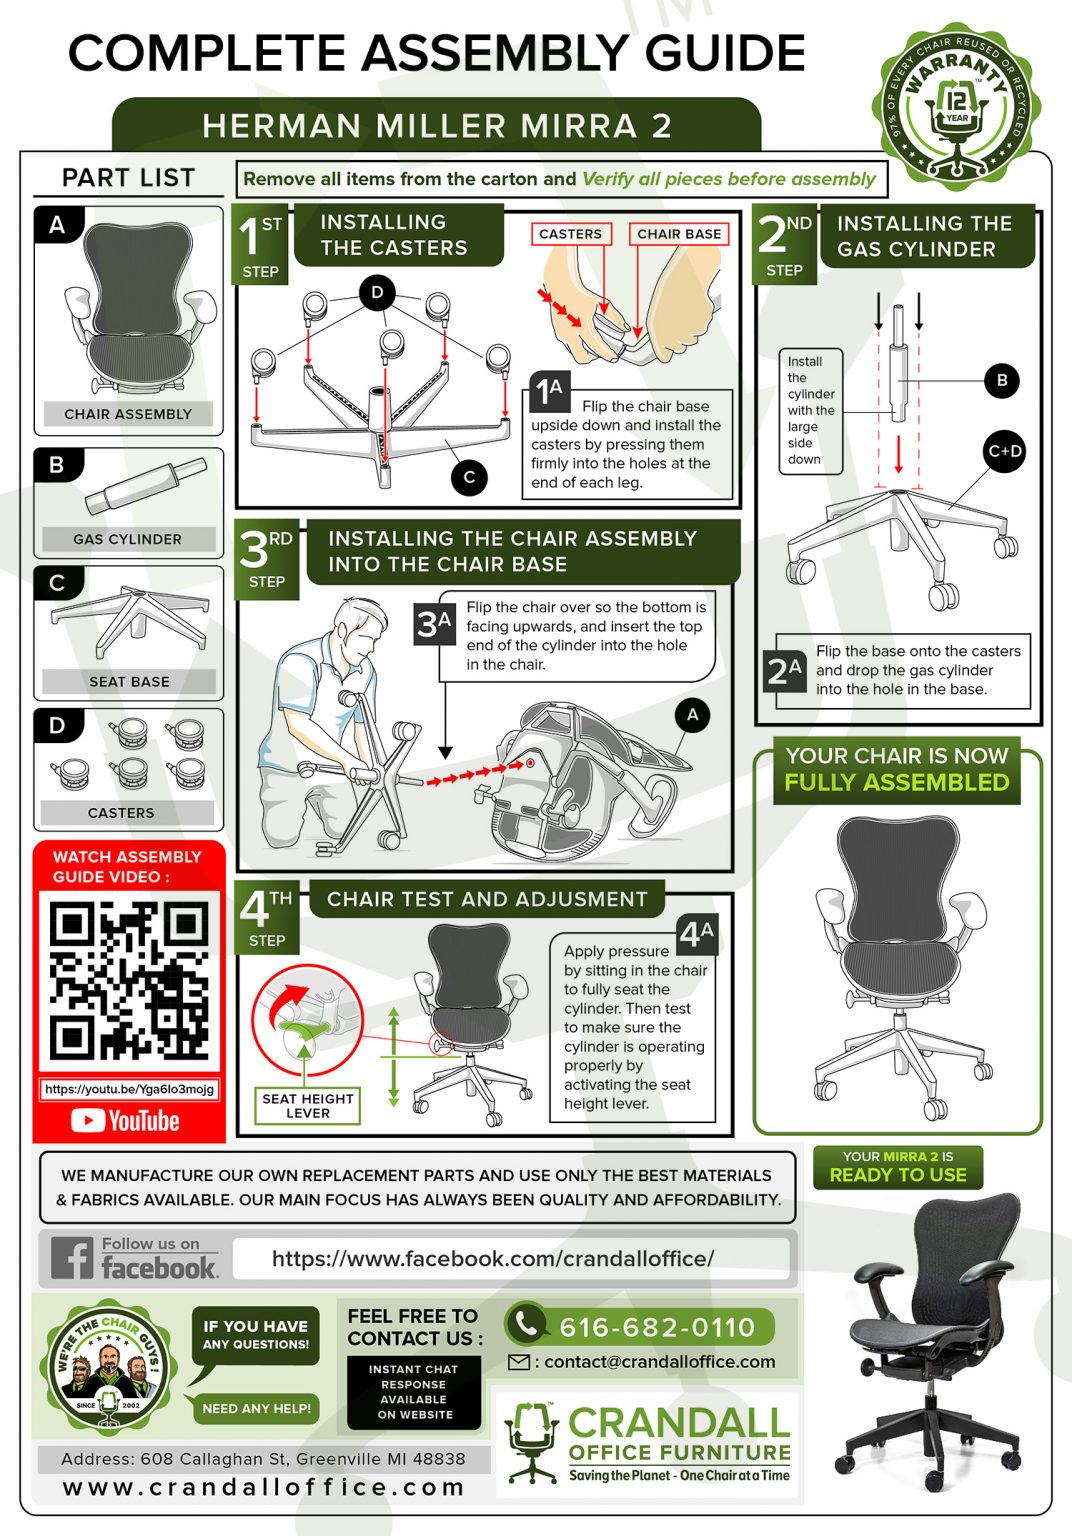 Crandall Office Furniture Refurbished Herman Miller Mirra 2 Office Chair Assembly Instructions 1072x1536 